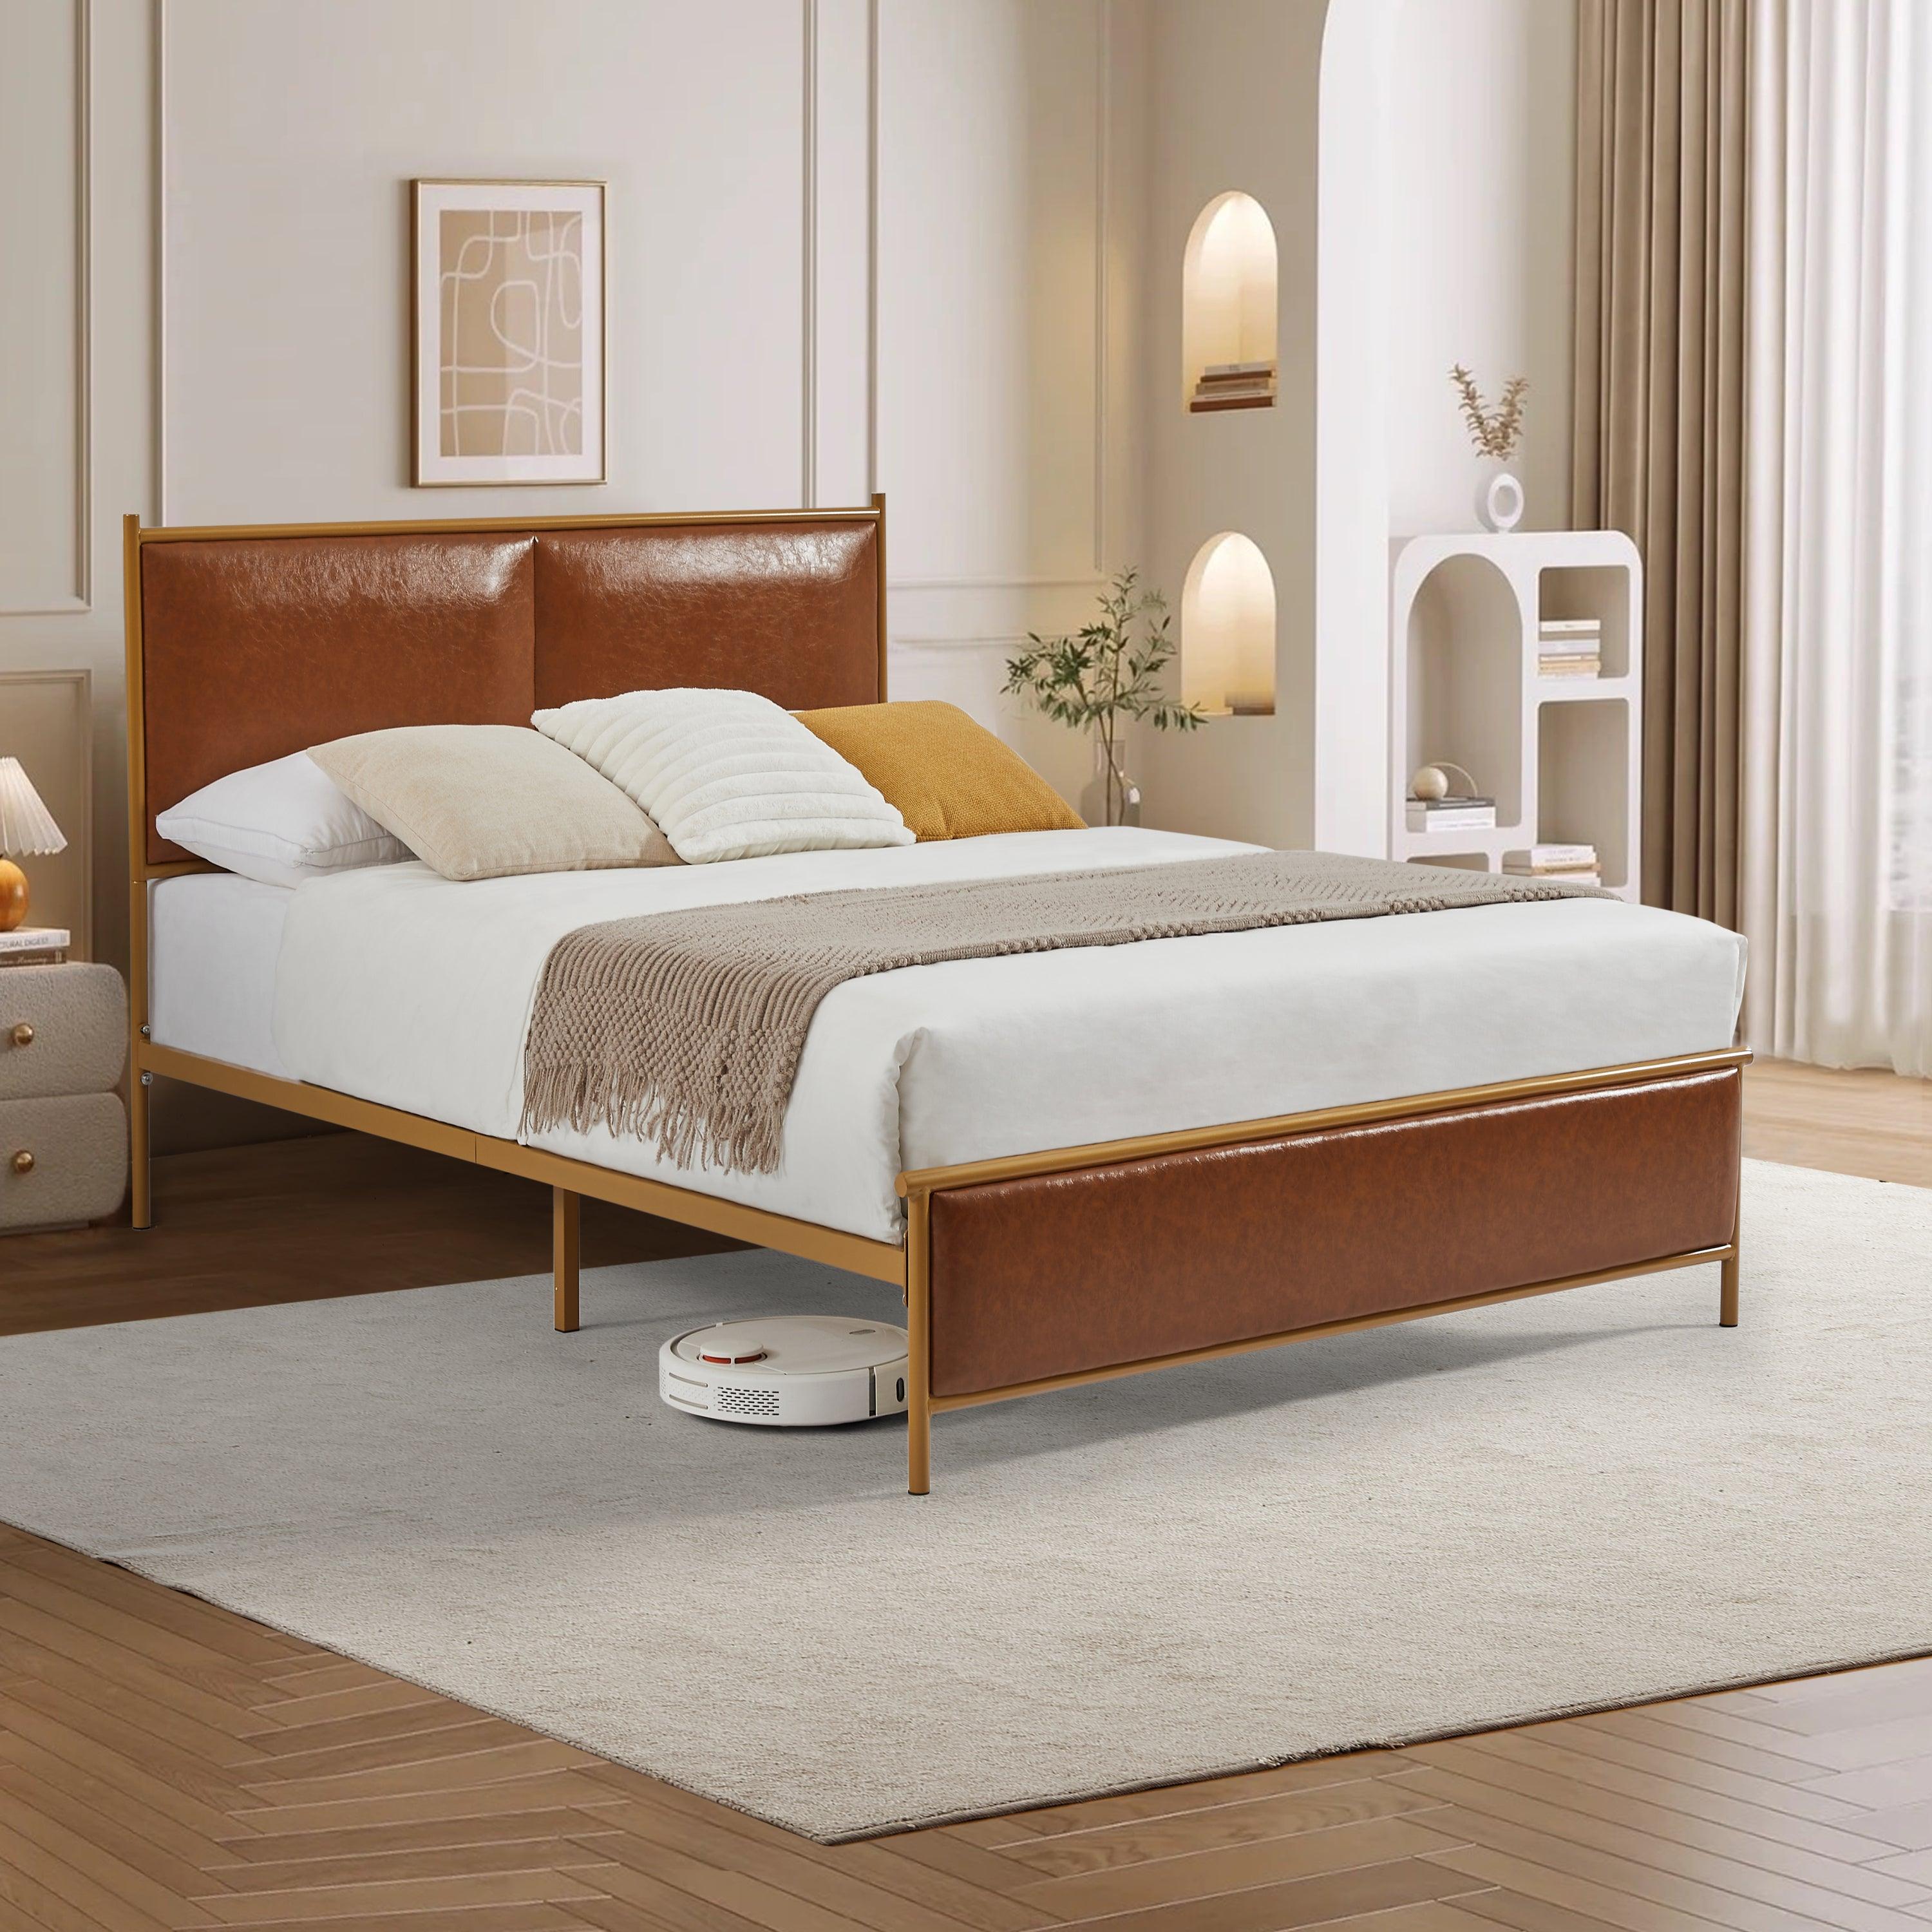 🆓🚛 Queen-Size Bed Classic Steamed Bread Shaped Backrest, Metal Frame, Solid Wood Ribs, Sponge Soft Bag, Coffee Color